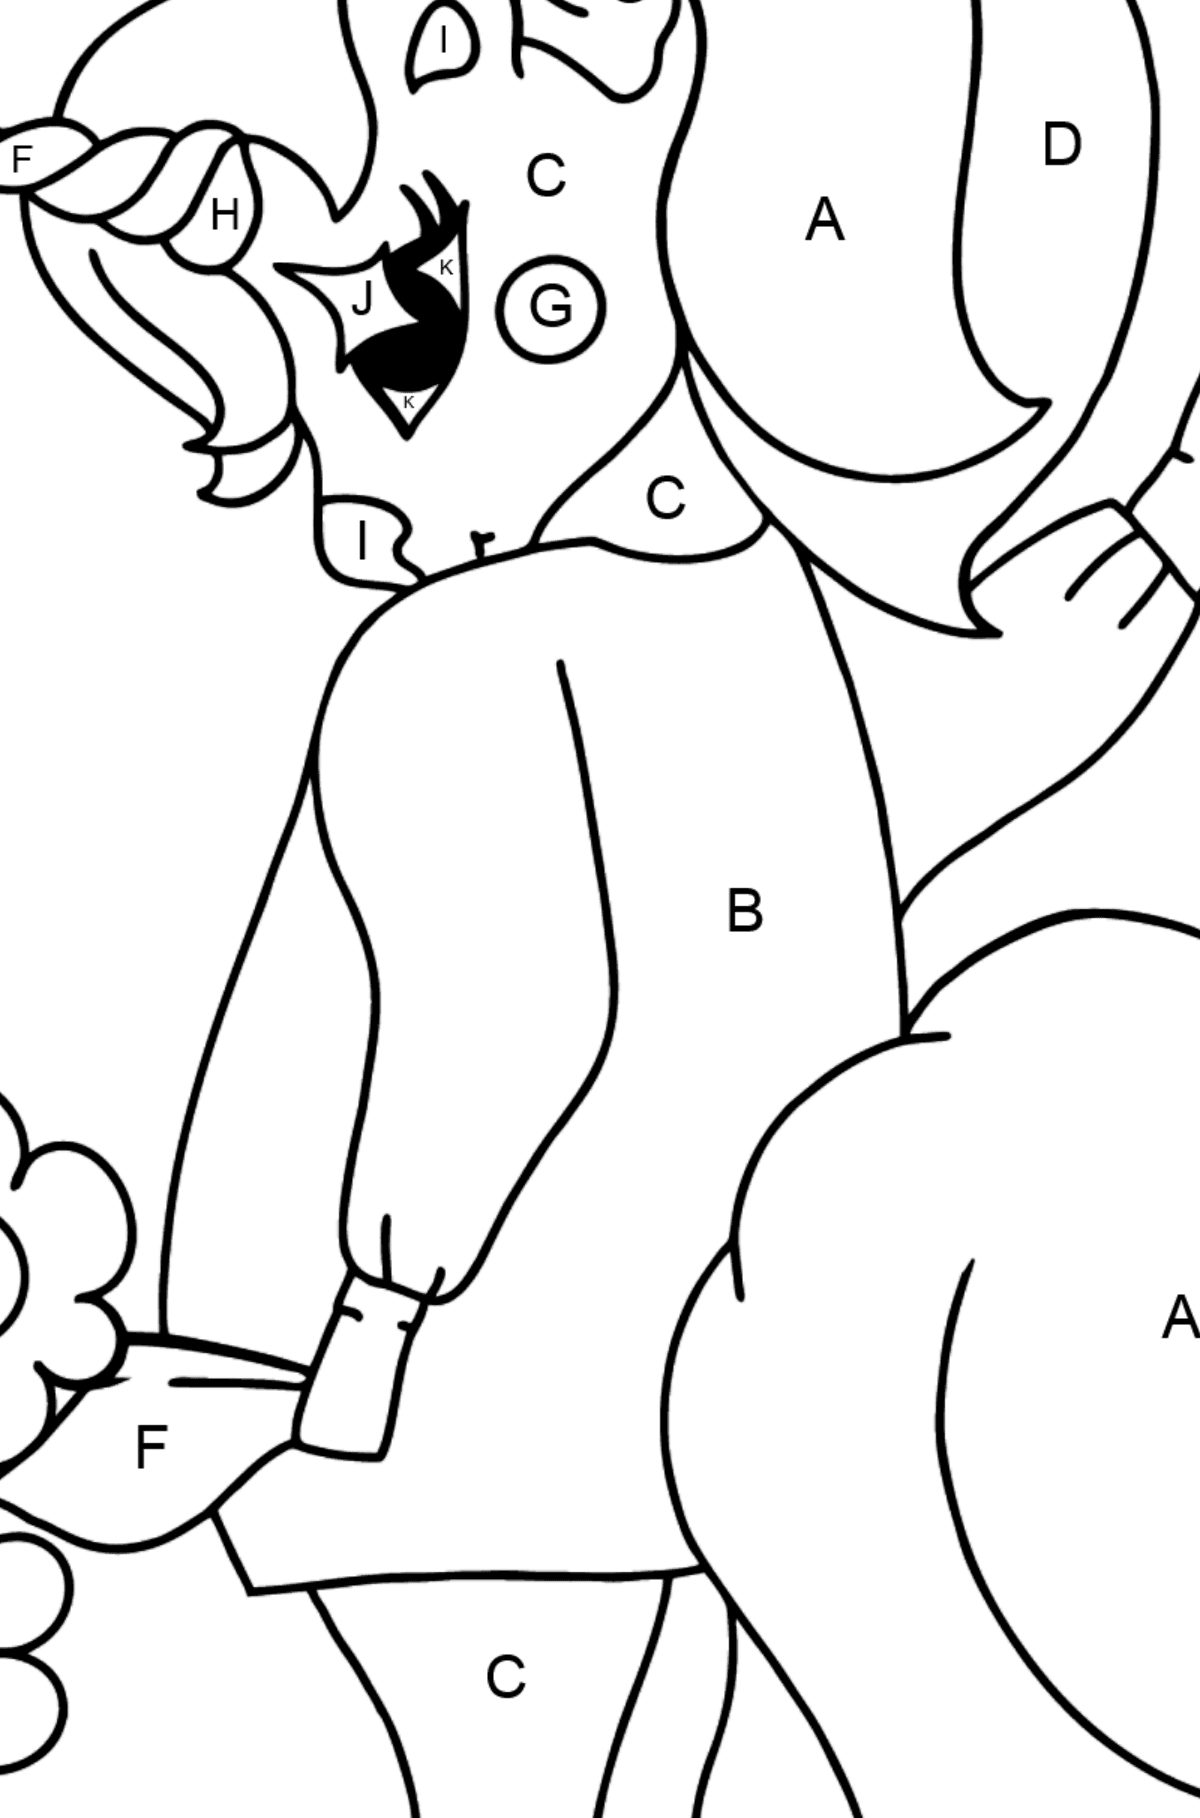 Magic Unicorn coloring page - Coloring by Letters for Kids